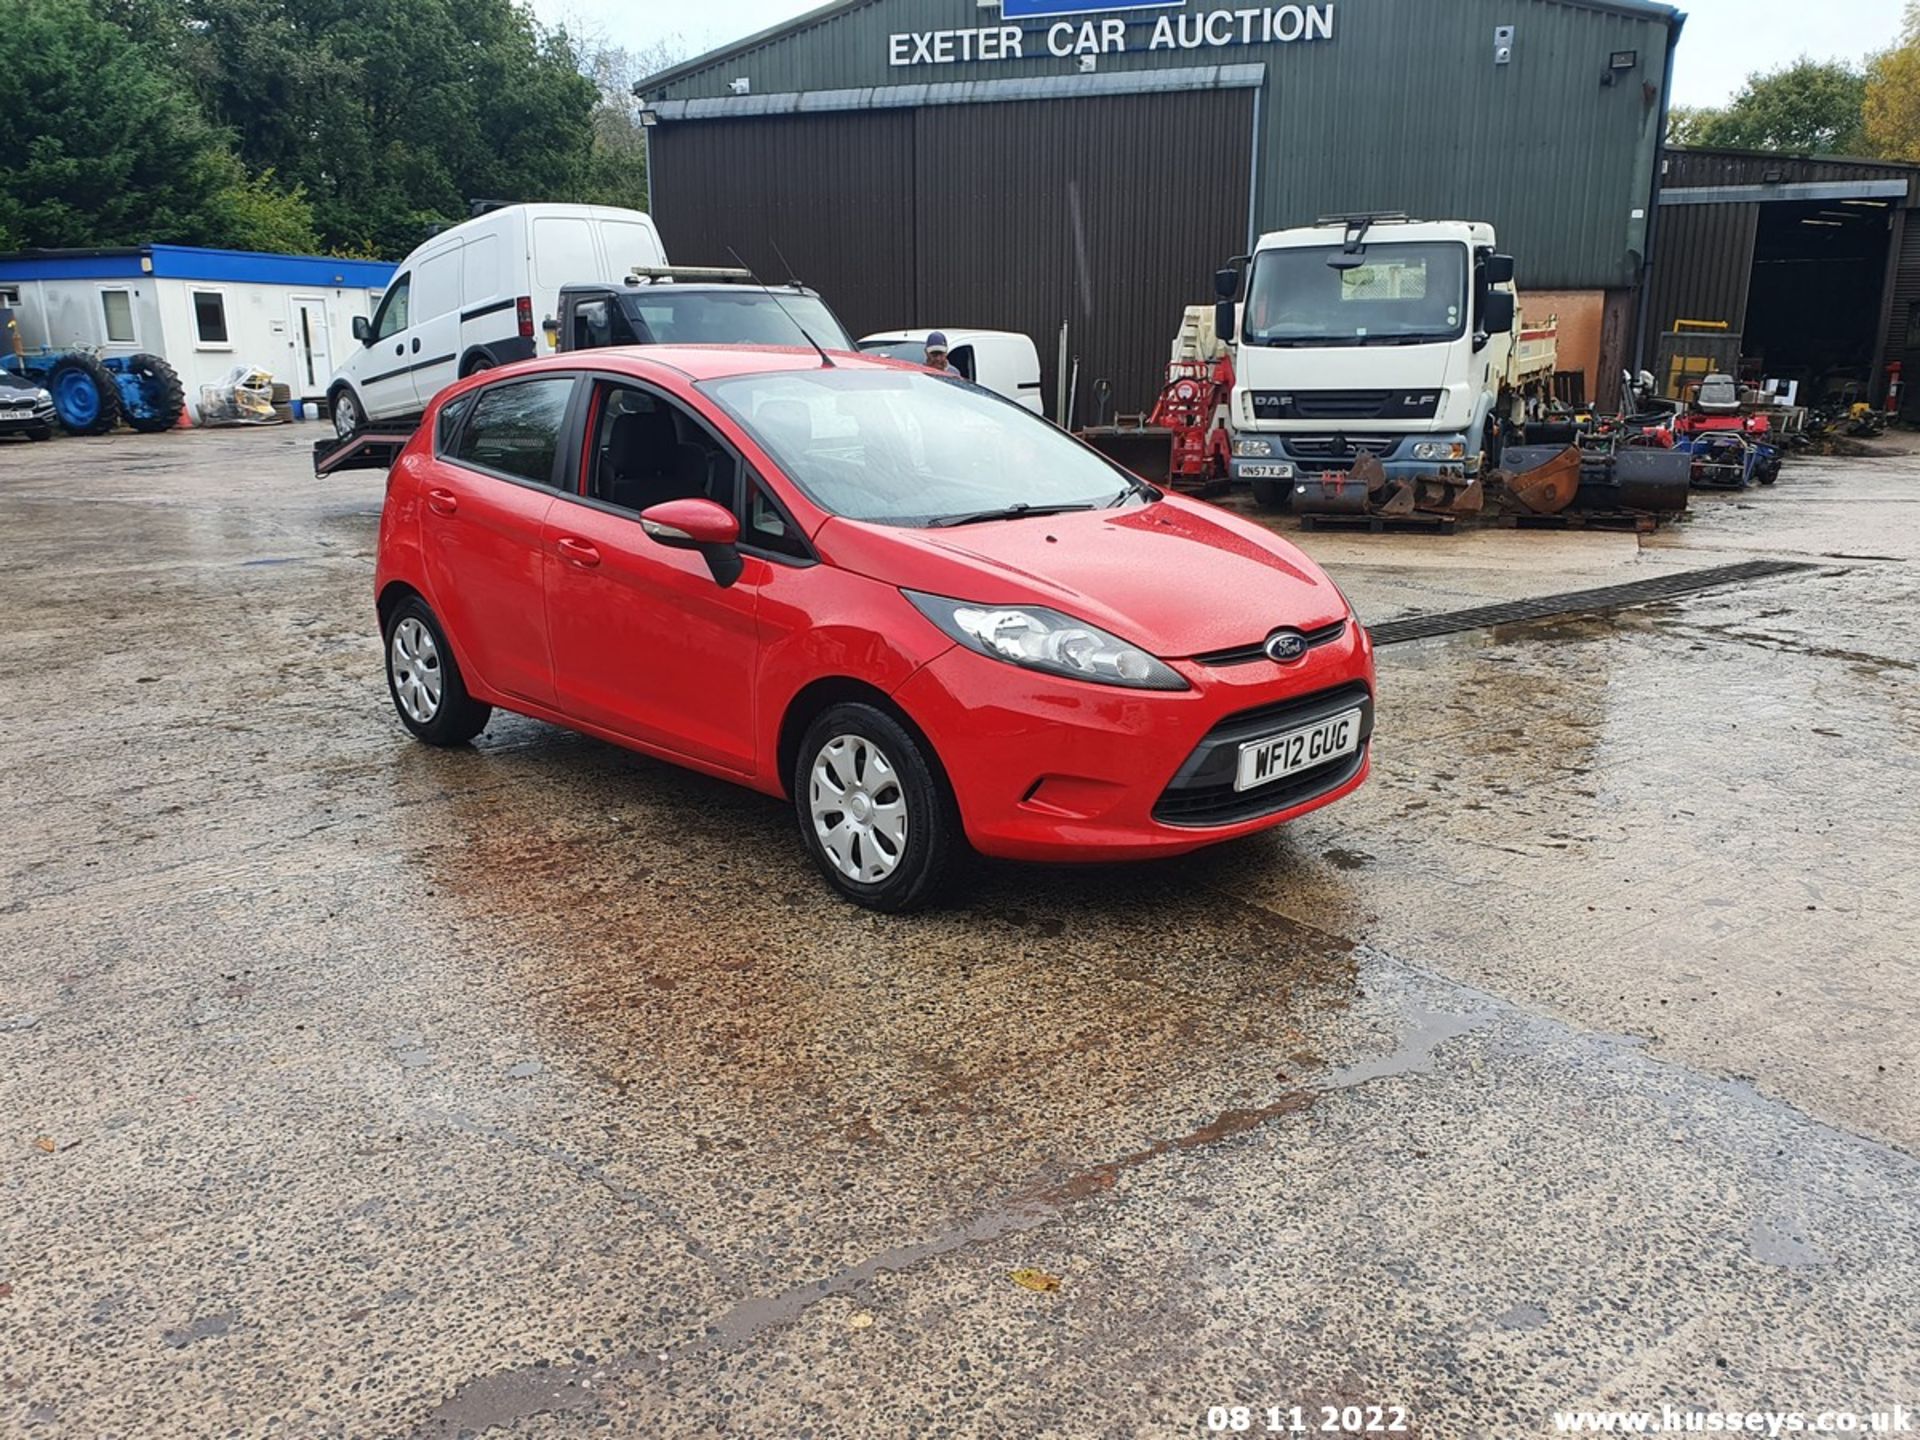 12/12 FORD FIESTA EDGE ECONETIC II T - 1560cc 5dr Hatchback (Red, 173k) - Image 46 of 59